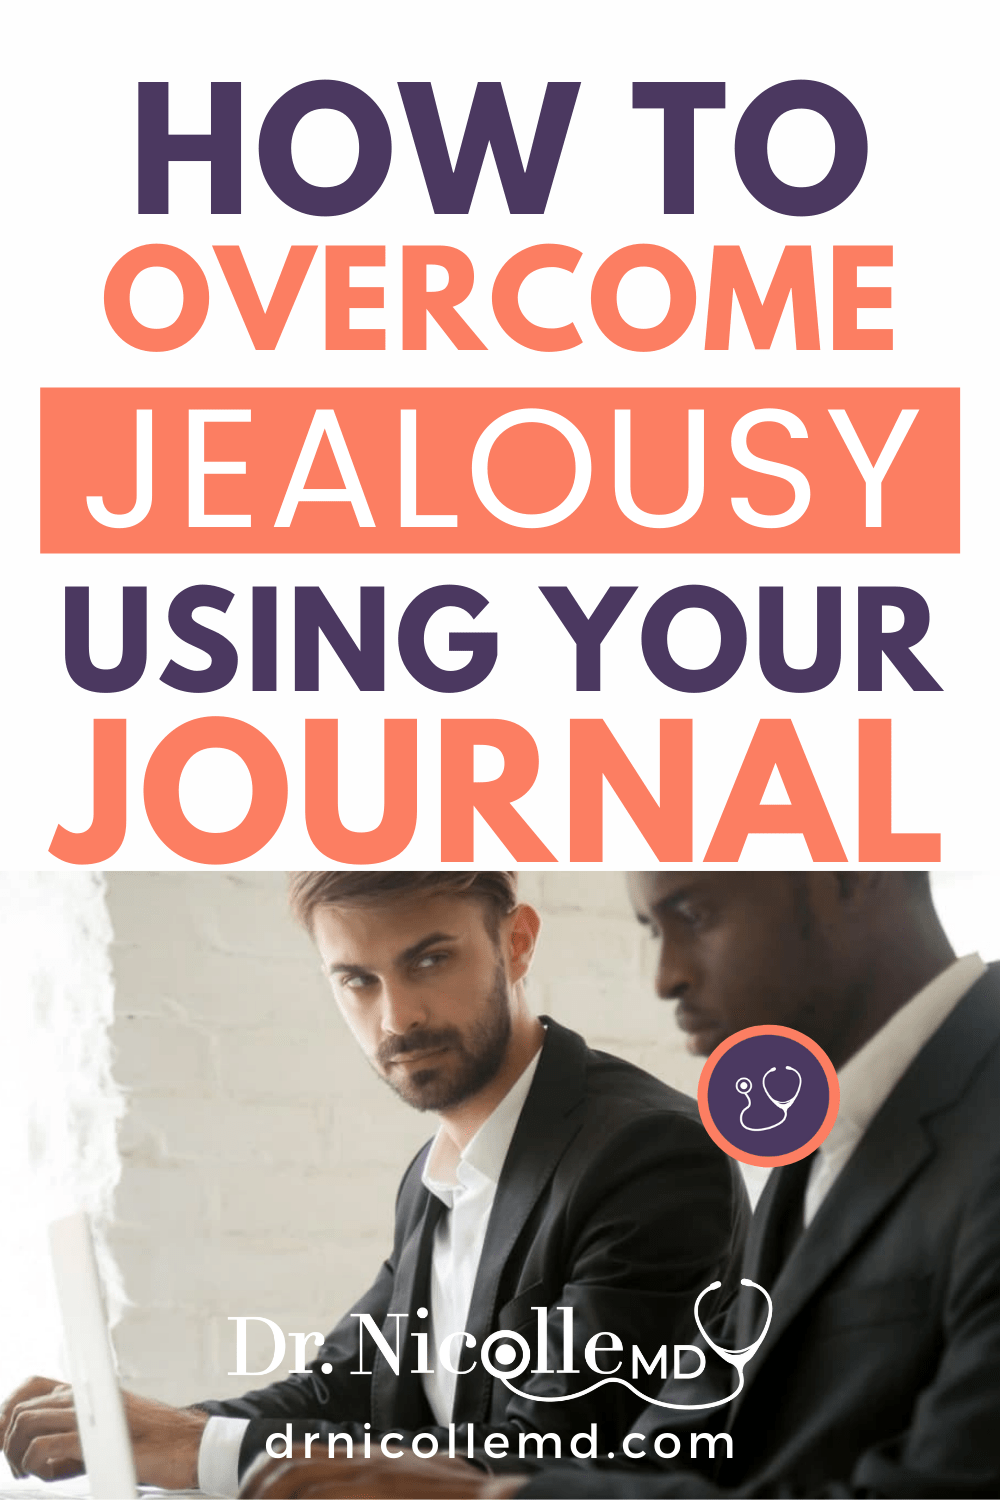 How To Overcome Jealousy Using Your Journal